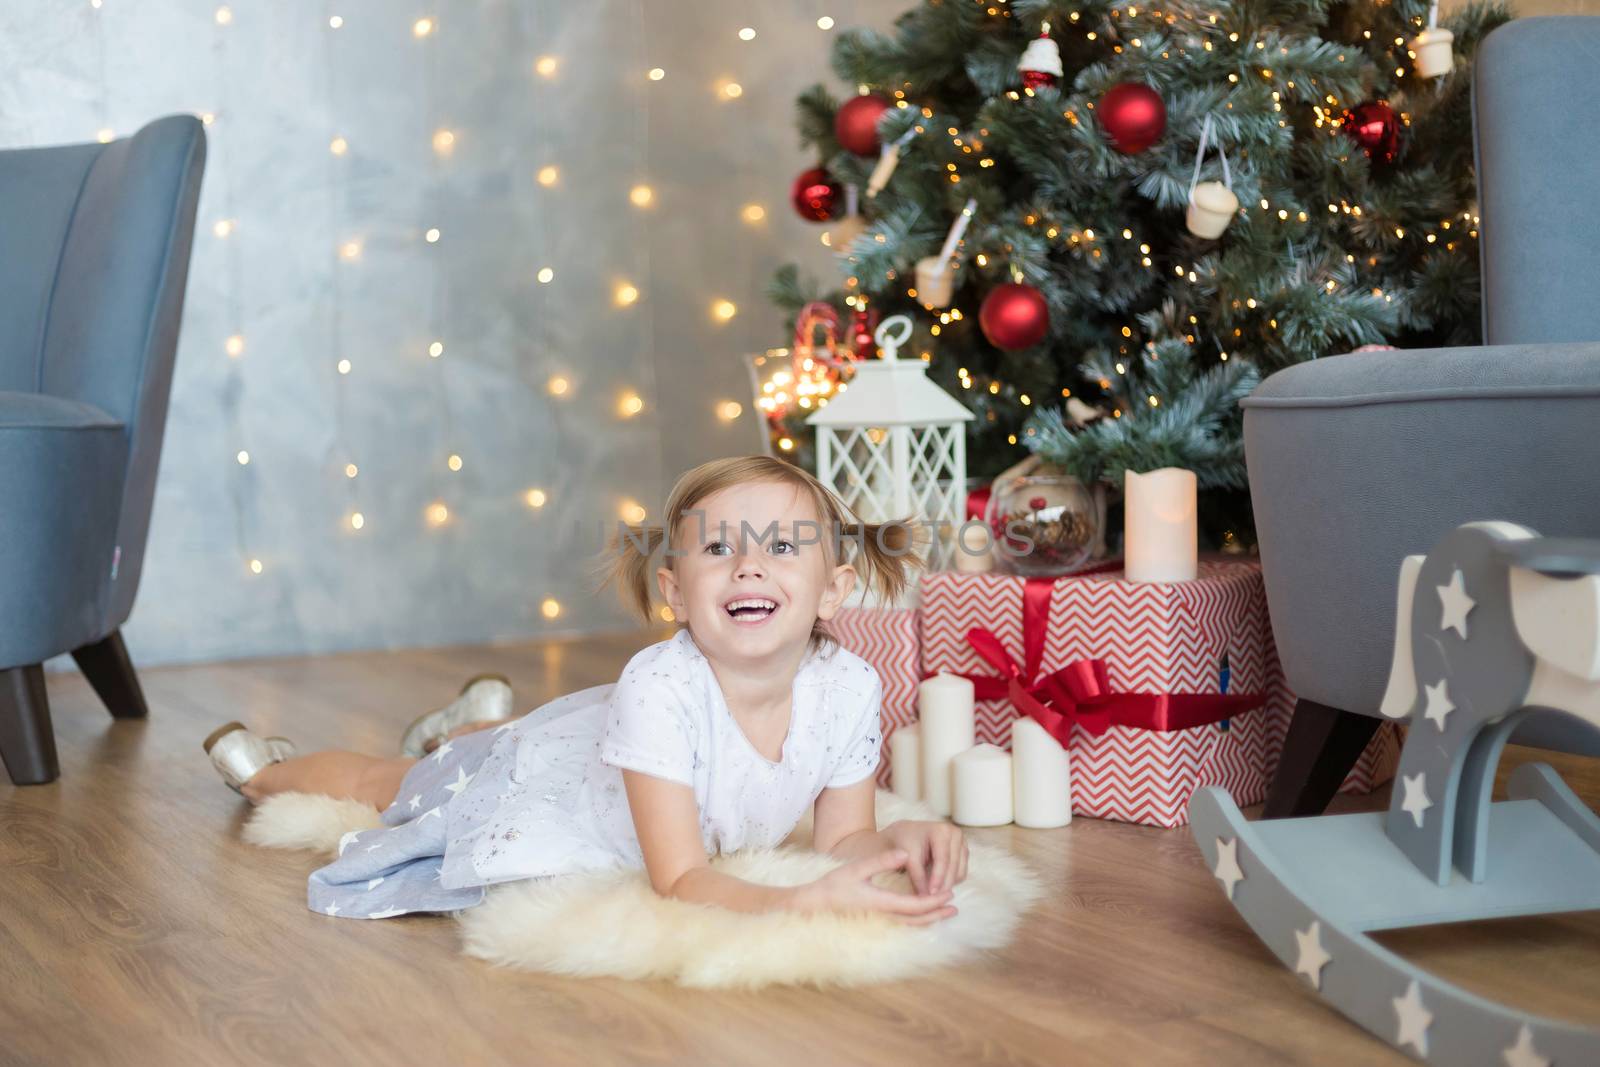 The pretty little child lies on the floor in front of Christmas tree by galinasharapova